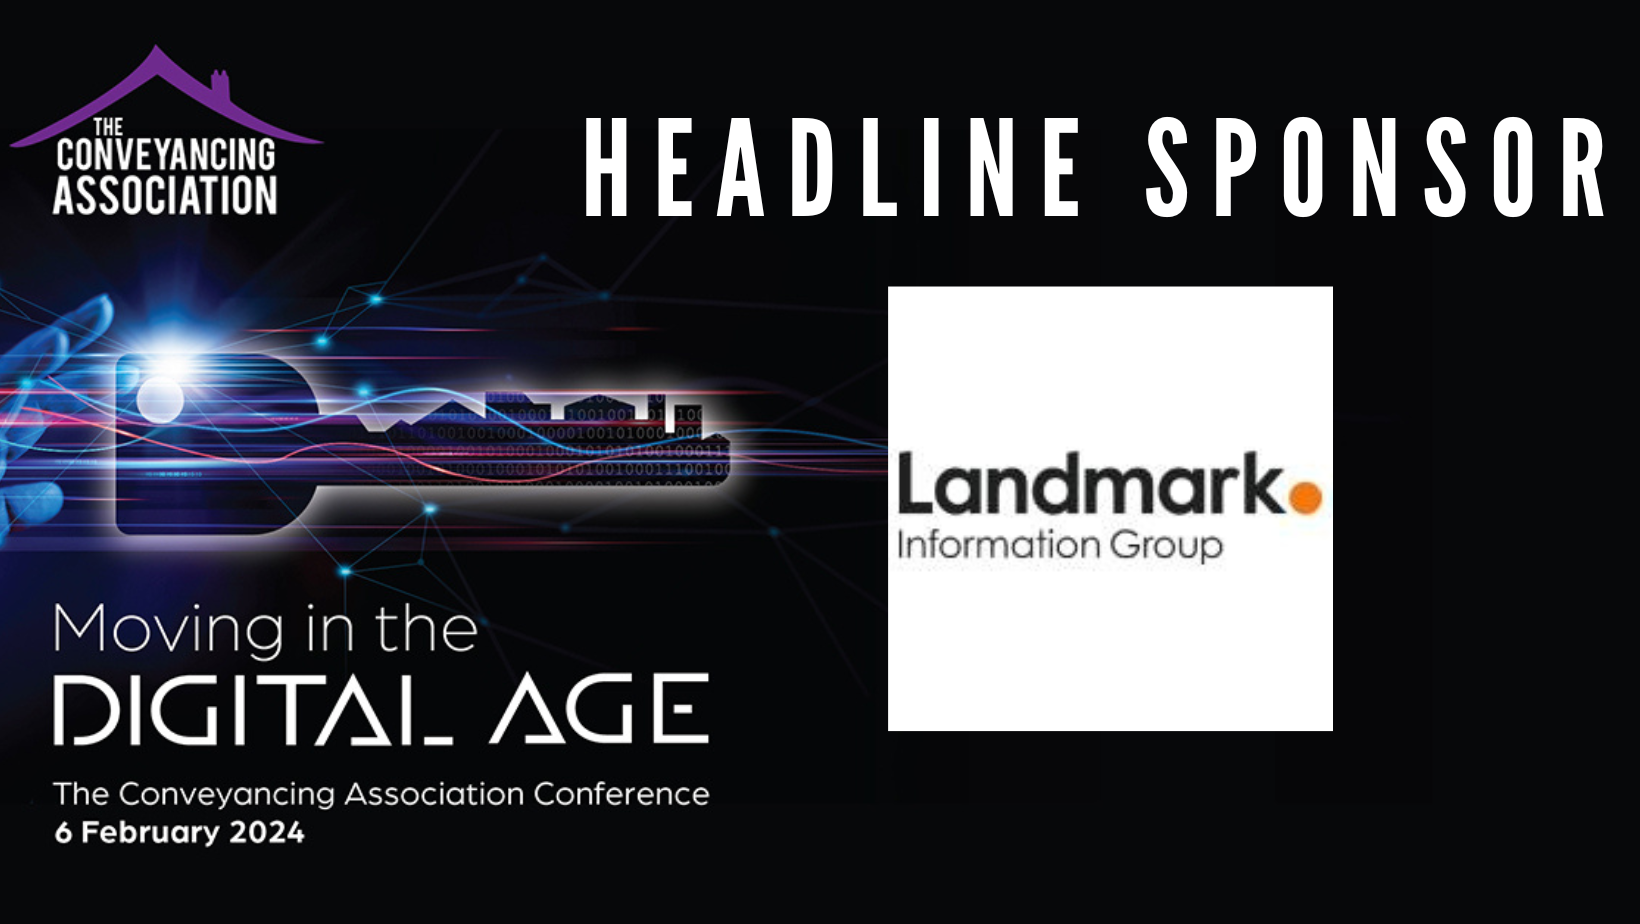 Landmark Information Group Announced as Leading Sponsor of Conveyancing Association Annual Conference 2024